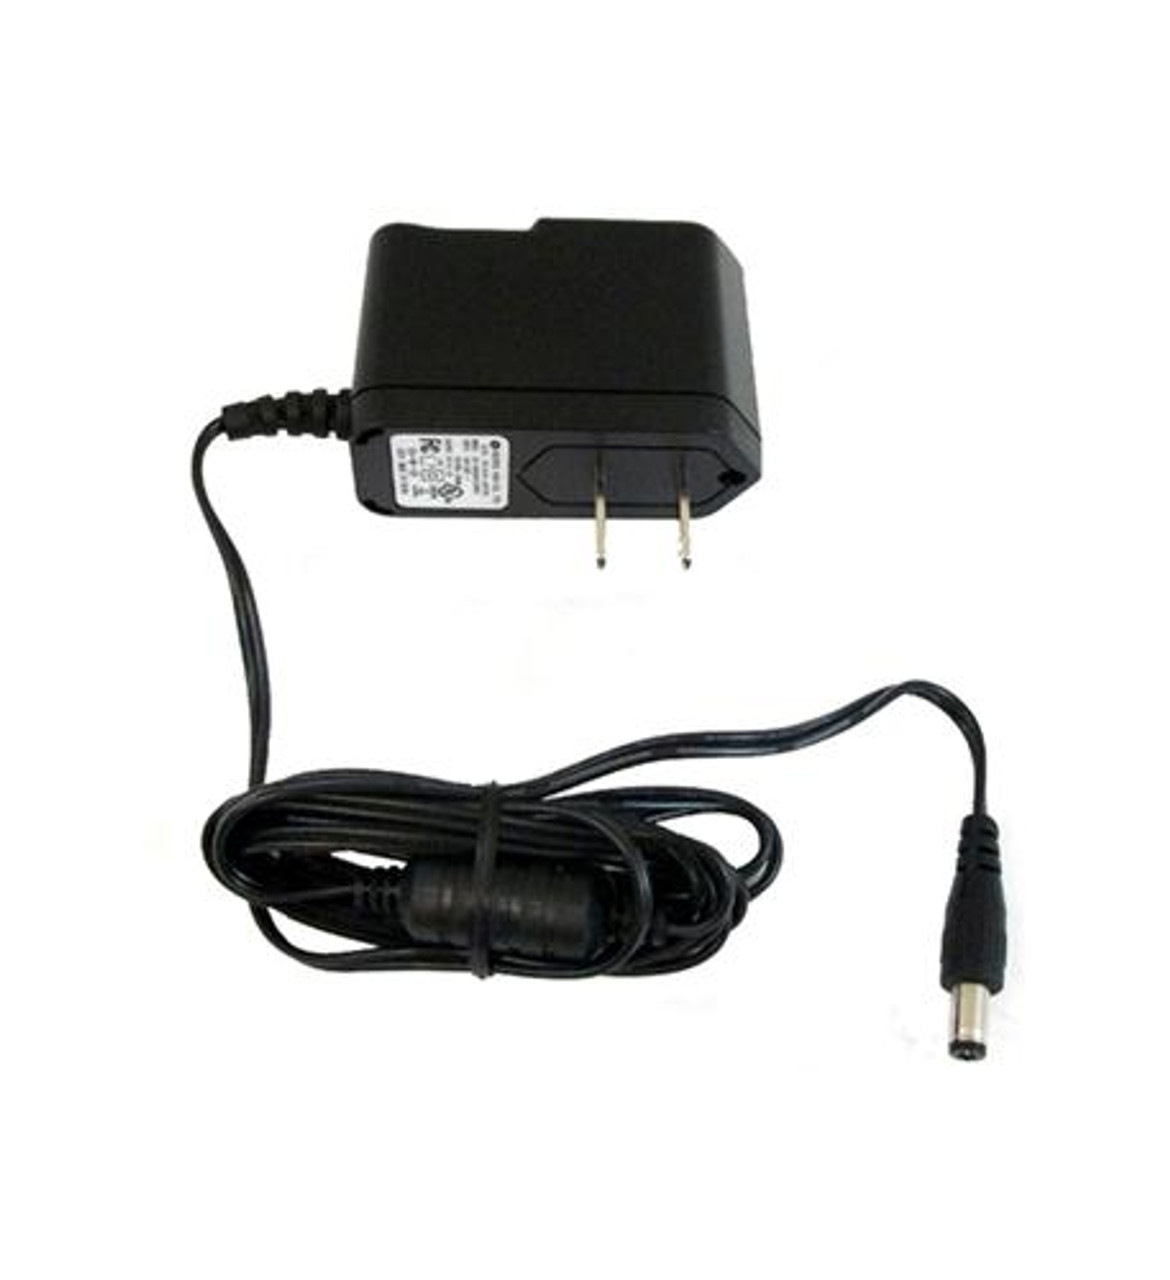 Yealink power supply for use with the SIP-T21(P), SIP-T19(P), SIP-T23(p), W52P, W52H, SIP-T23G, SIP-T40P, T30G,T31G,T33G